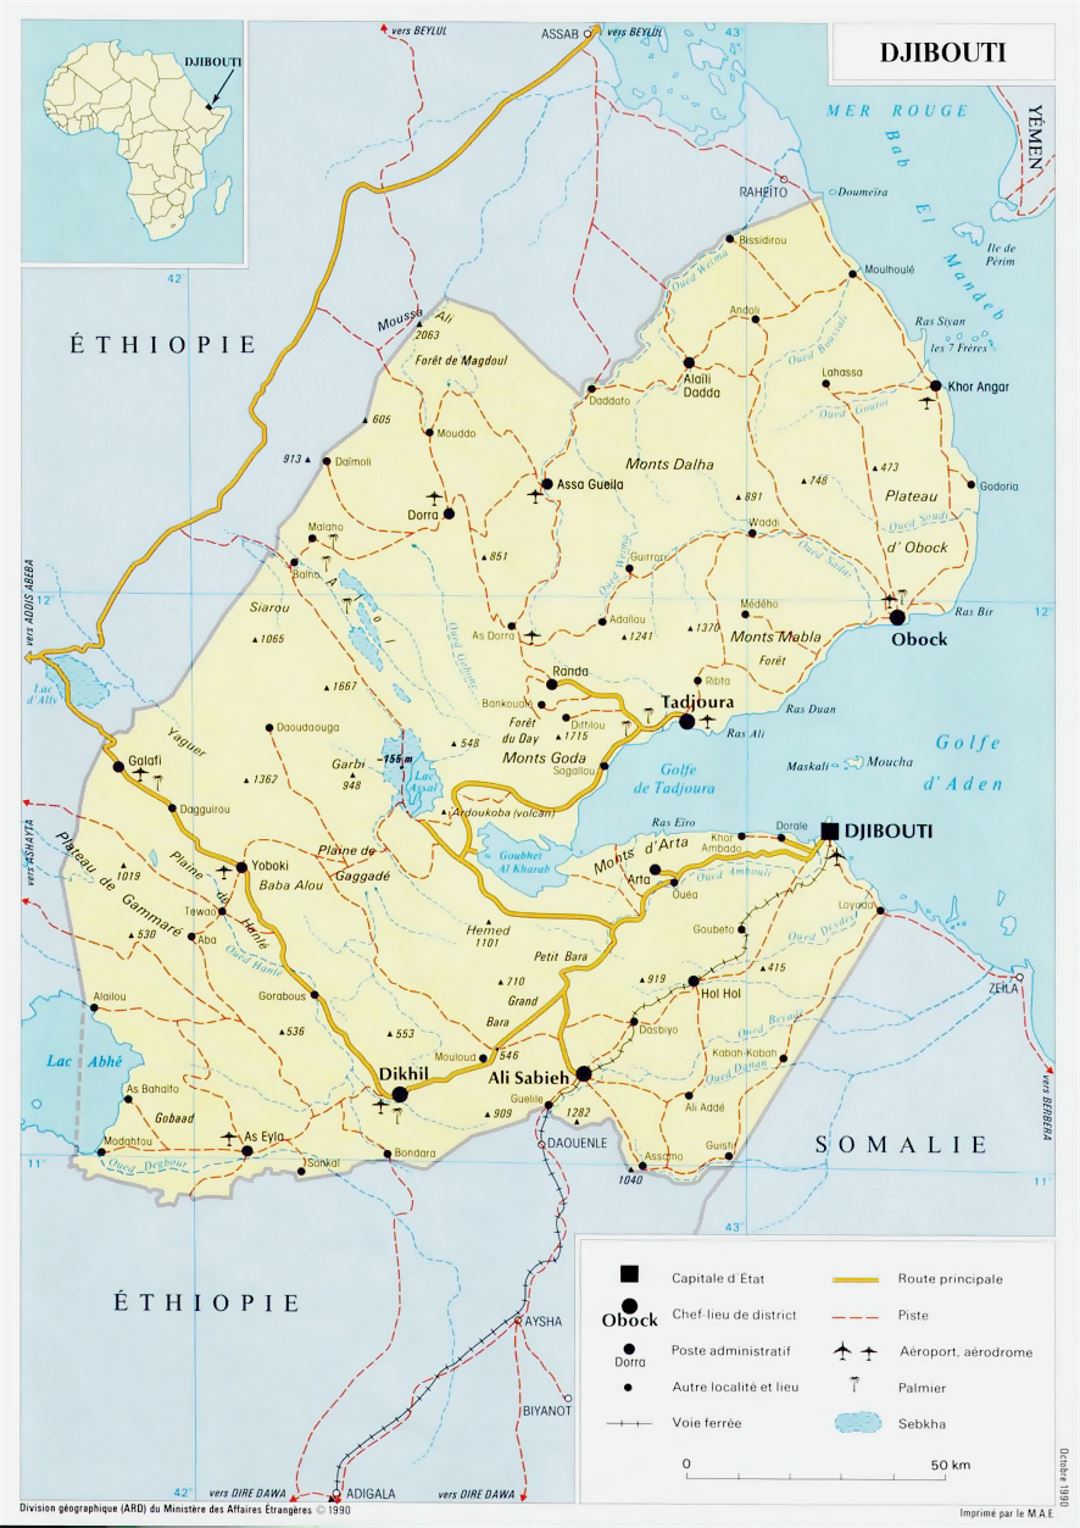 Detailed political map of Djibouti with roads, railroads, cities and airports